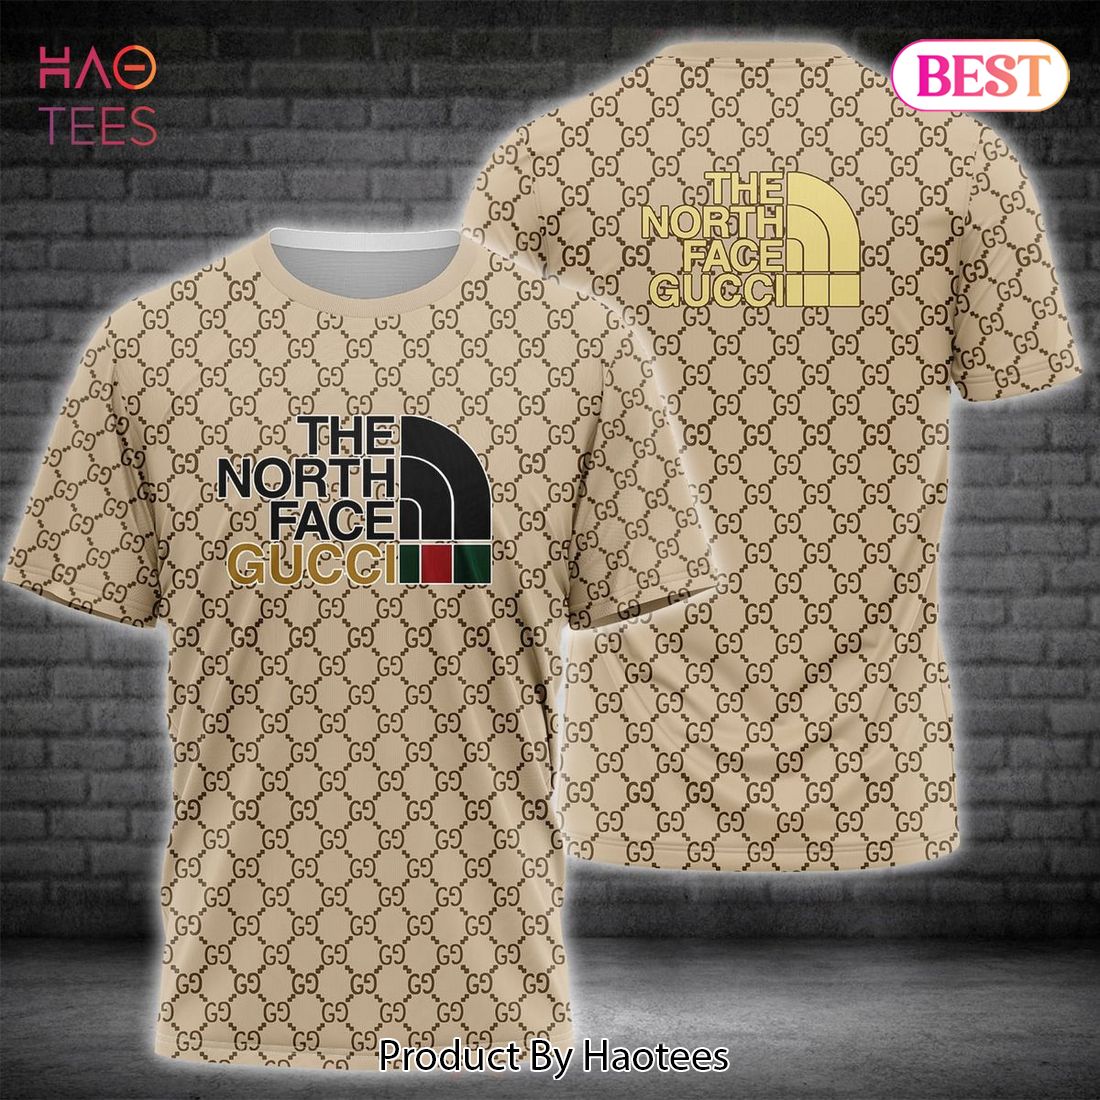 BEST The North Face Gucci Luxury Brand 3D T-Shirt